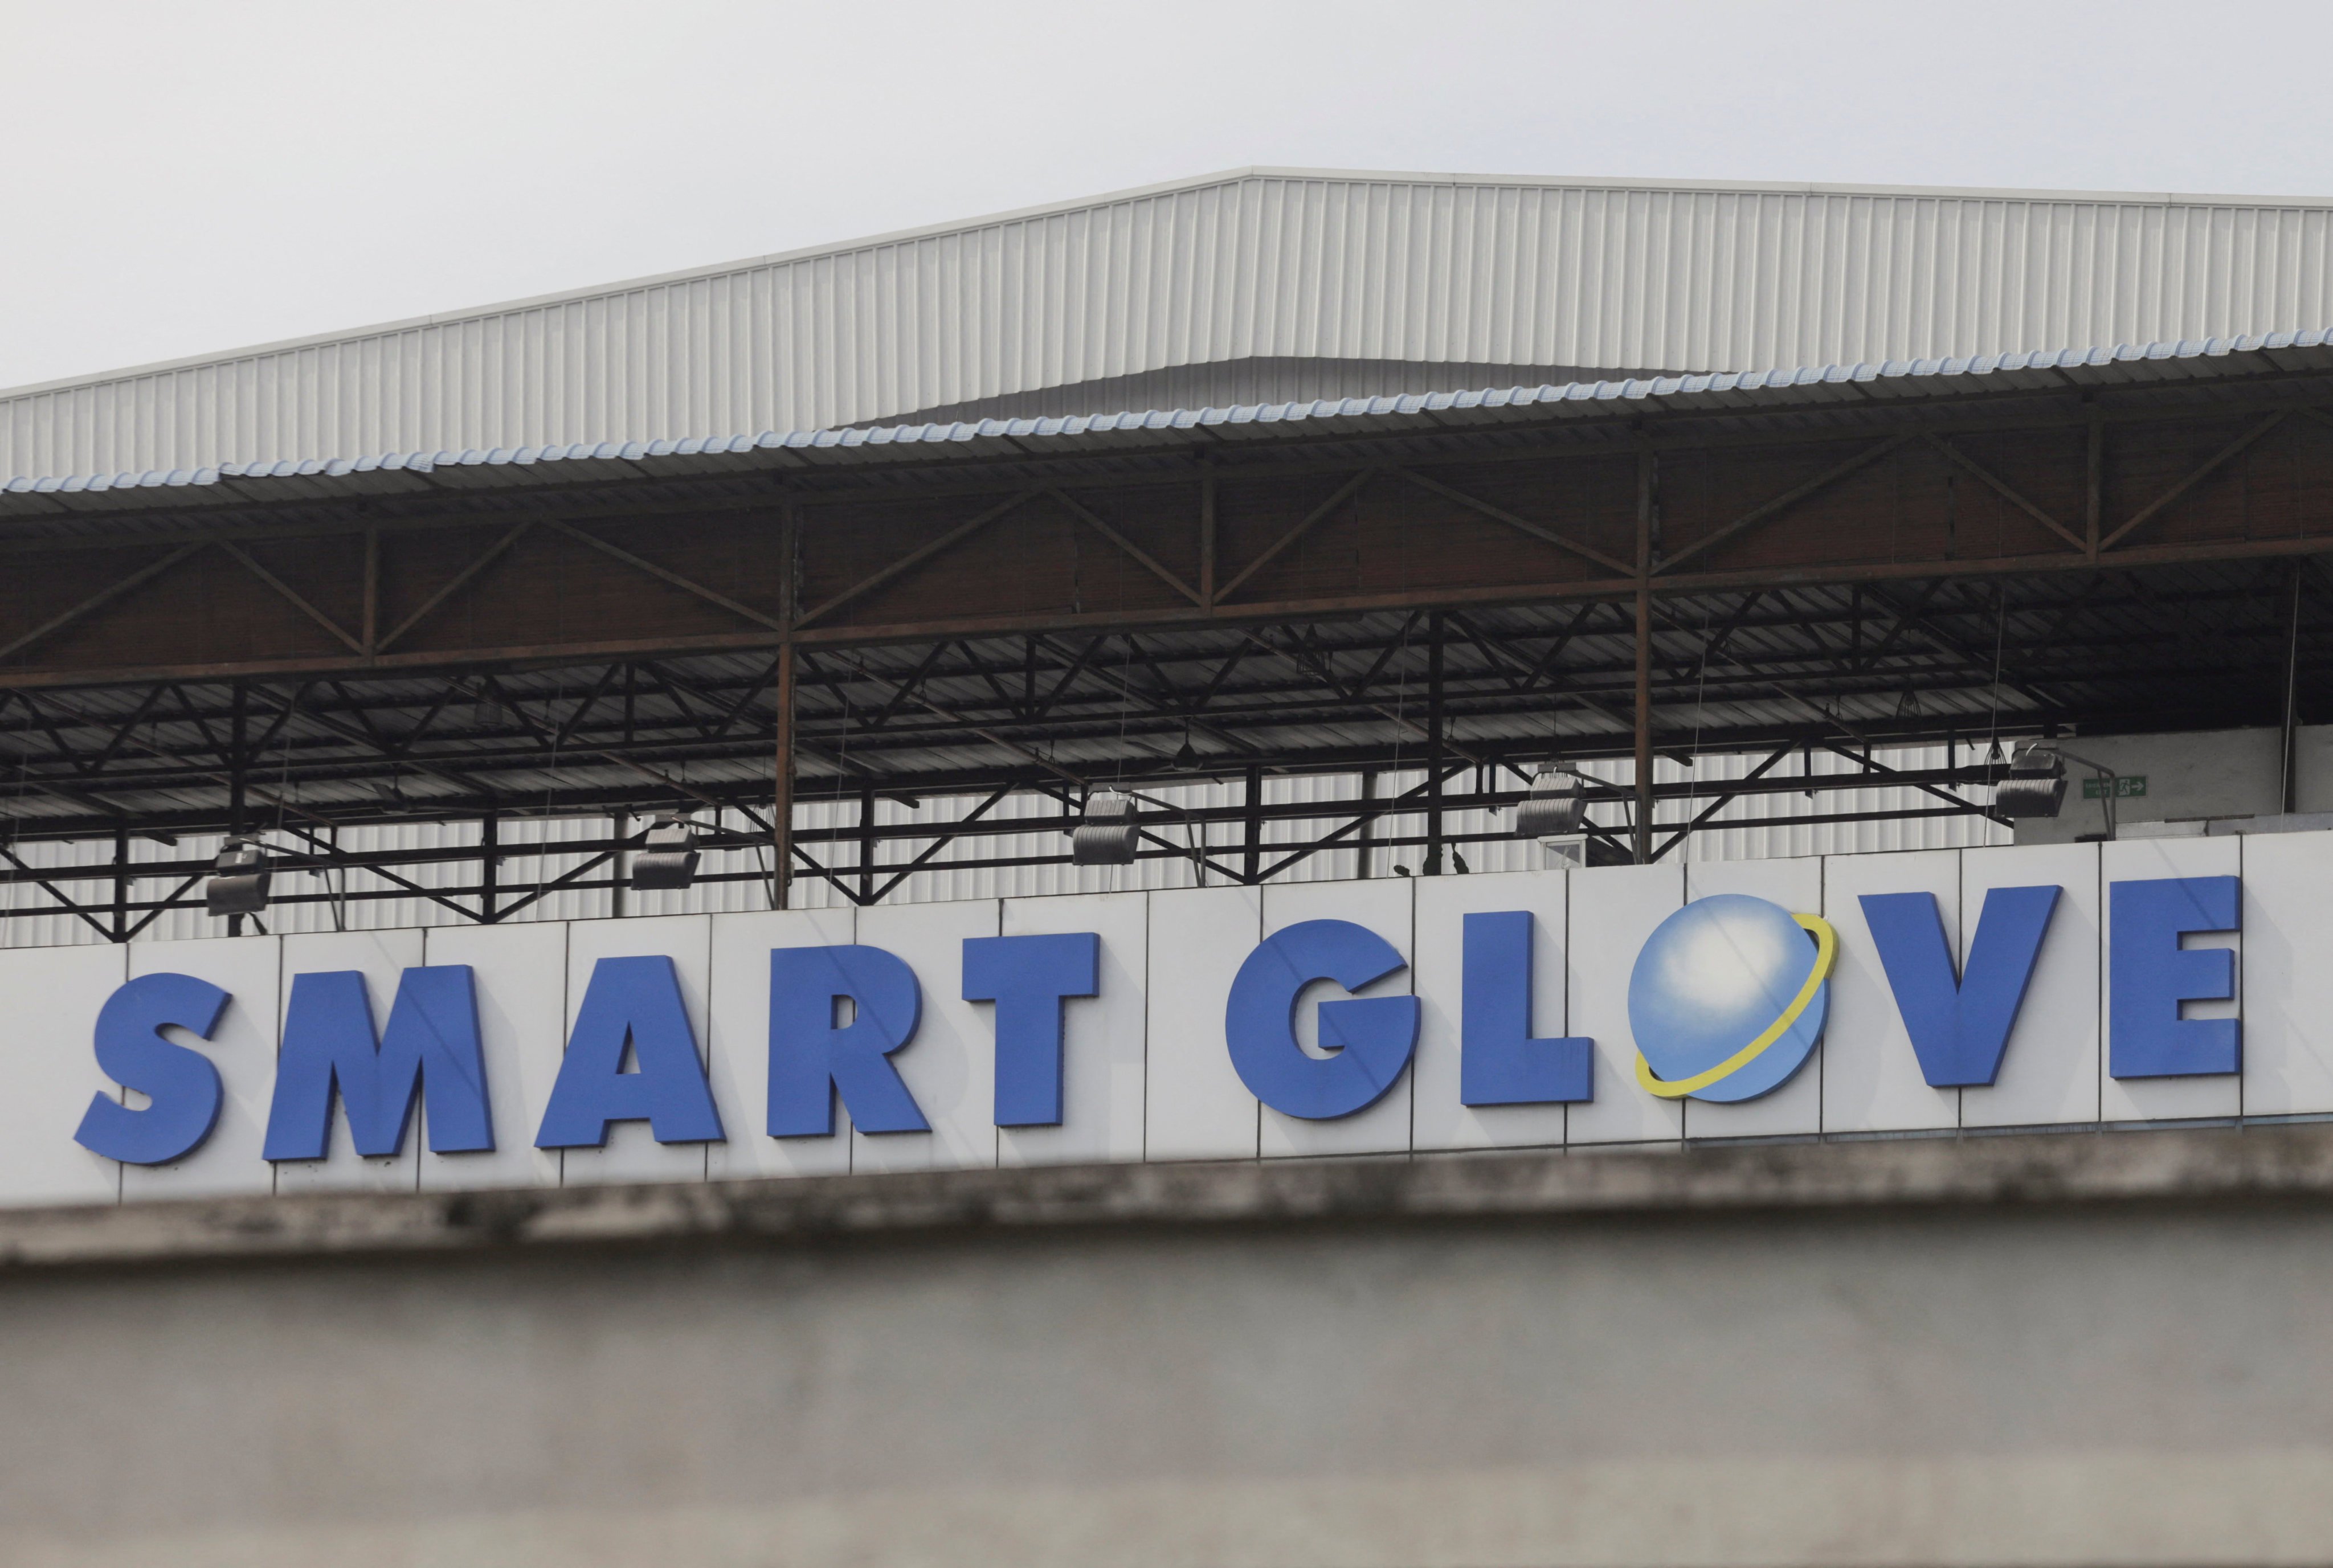 Smart Glove and its group of companies allegedly used forced labour at production facilities. Photo: Reuters